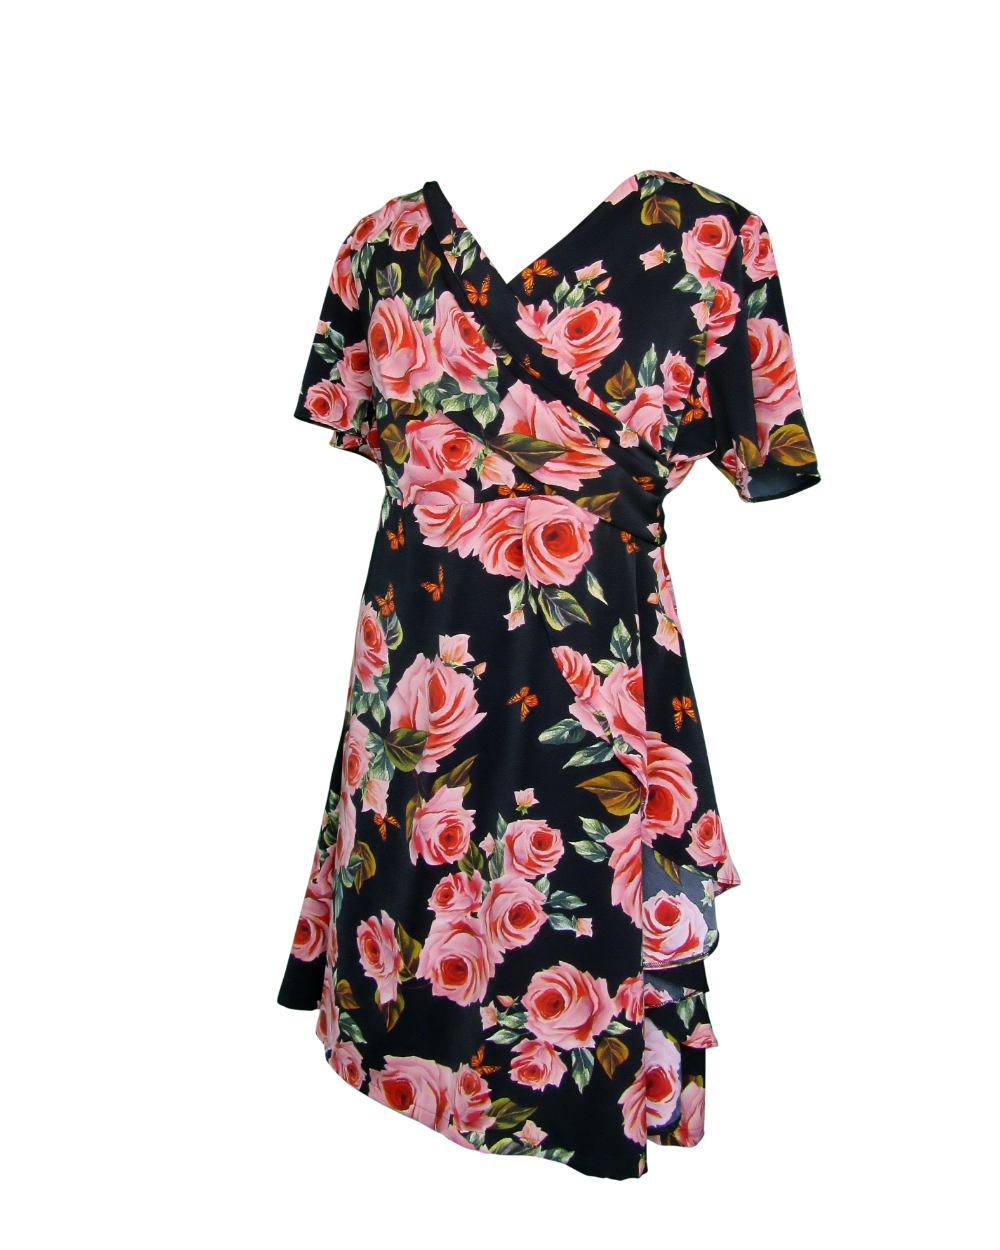 Women's Red and Black Floral Wrapped Dress for Summer Parties and Weddings, Perth AU